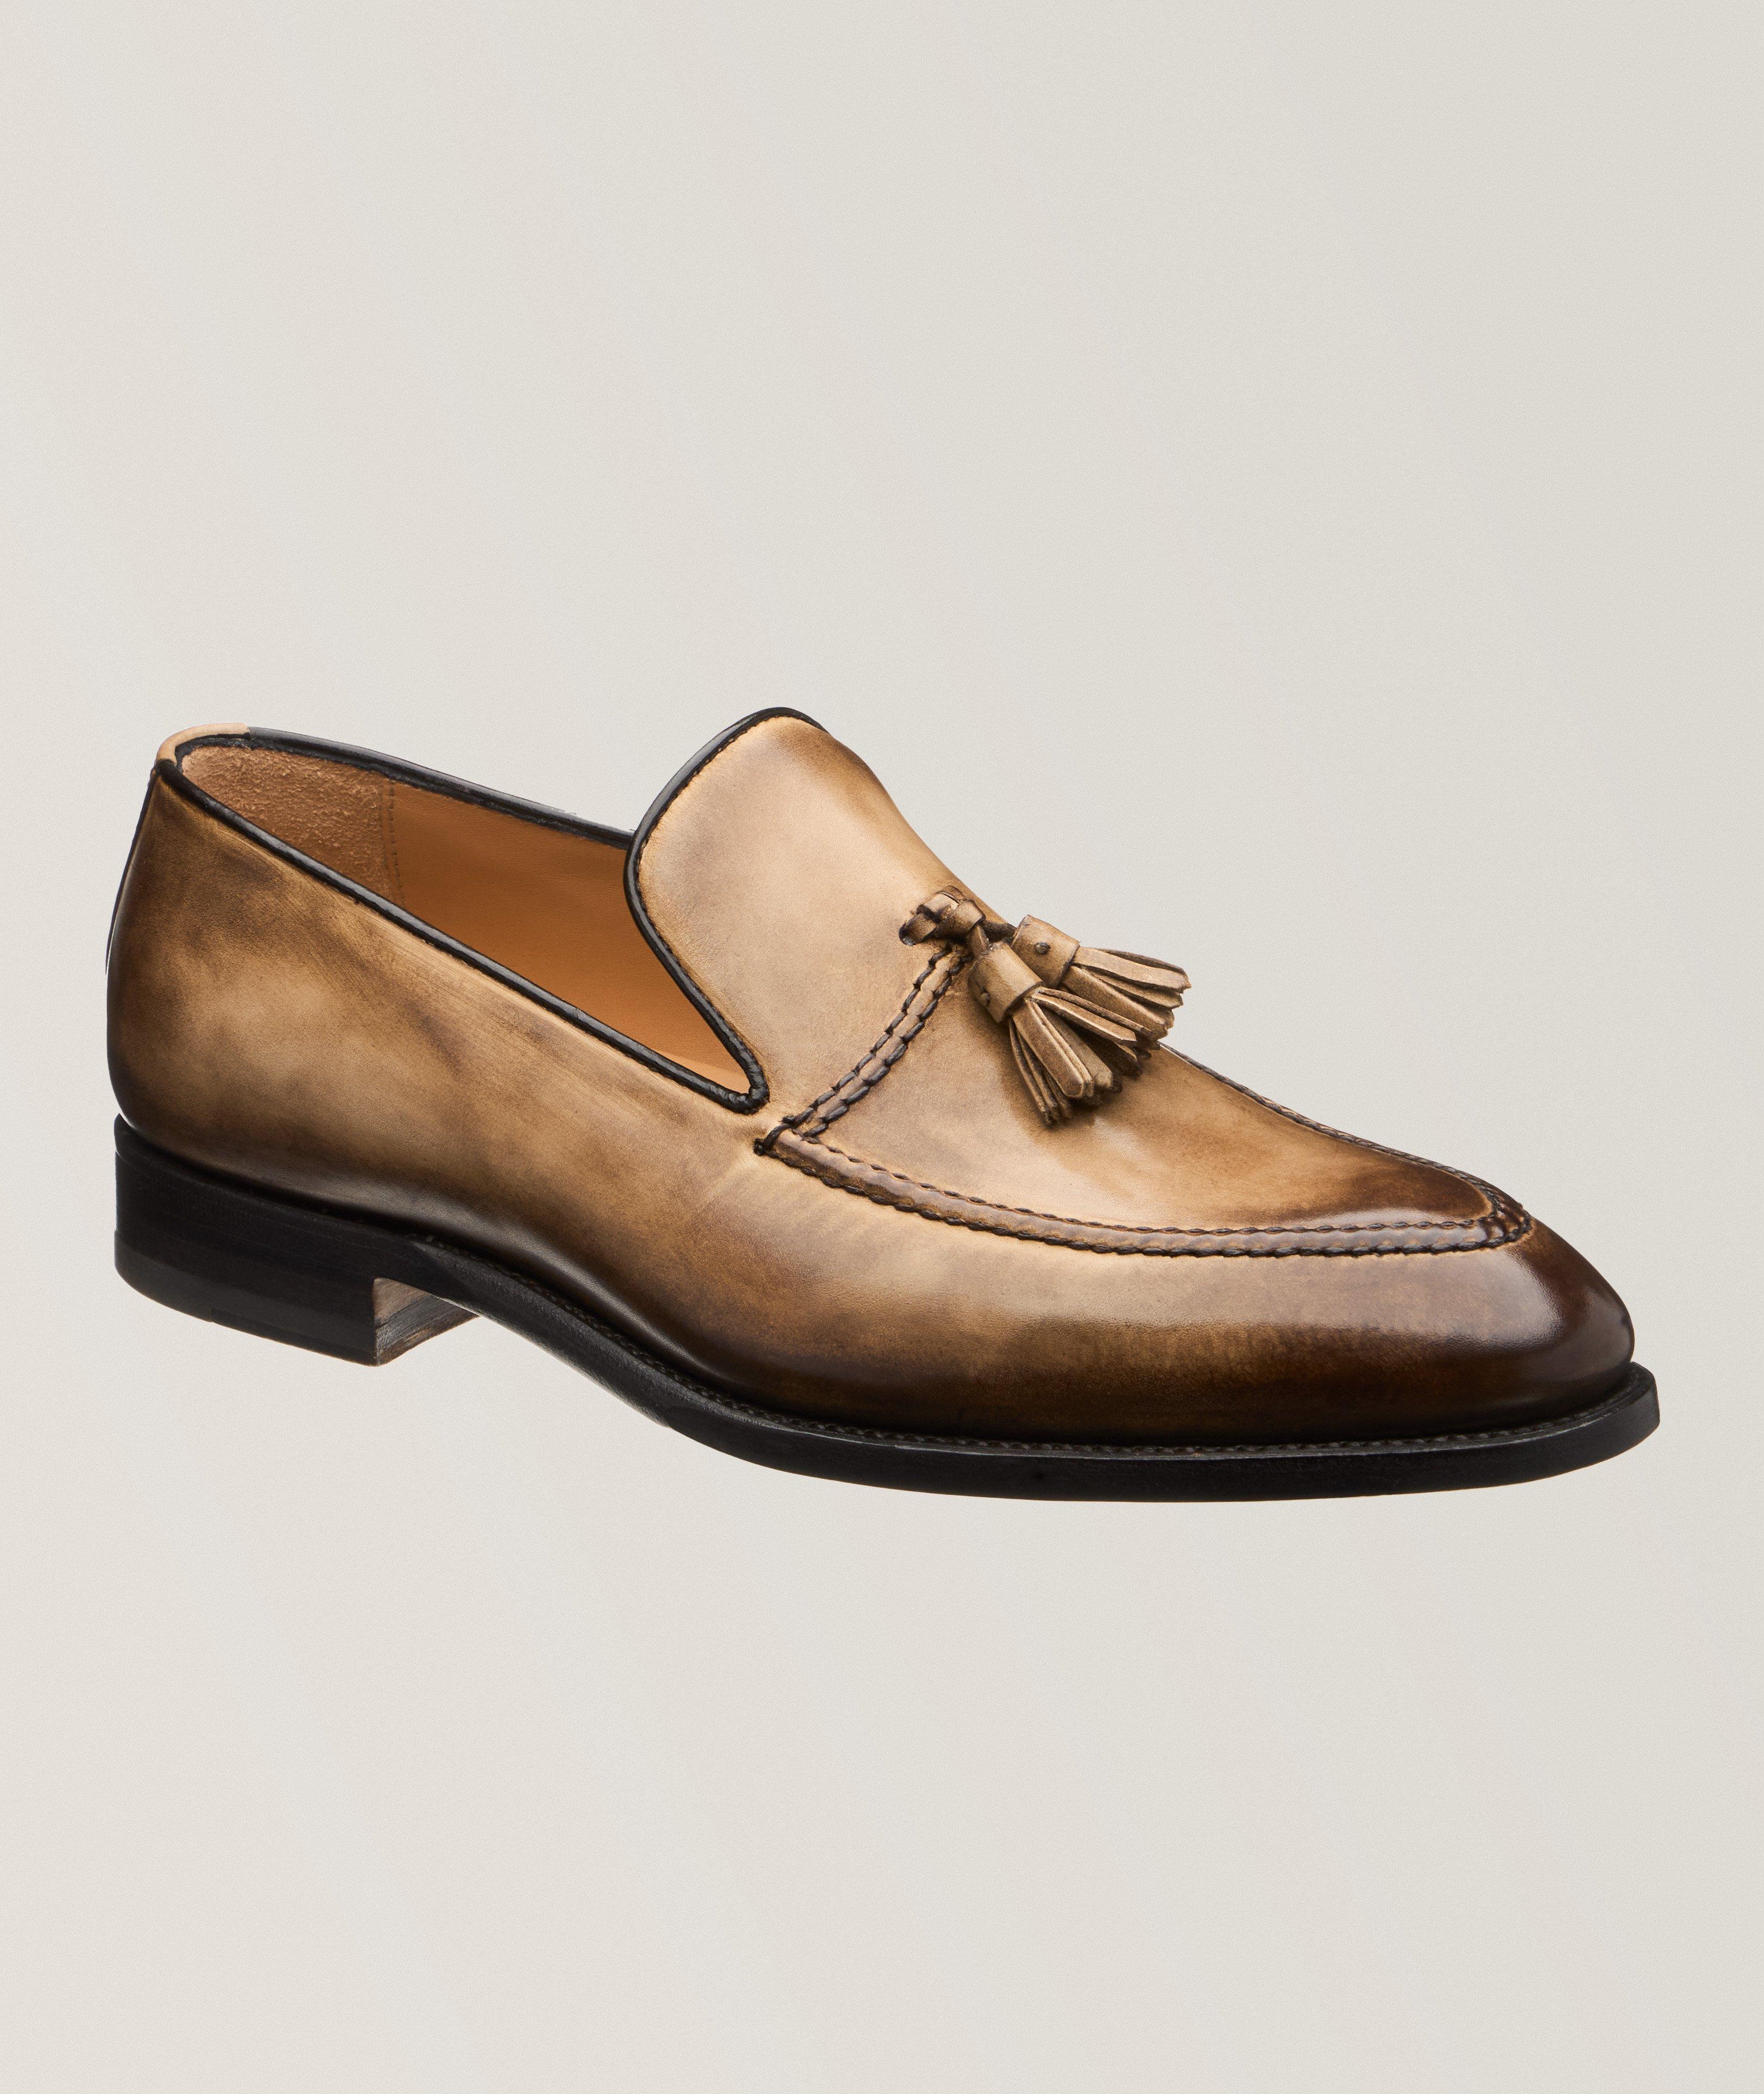 Effimero Ombre Leather Tassle Loafers